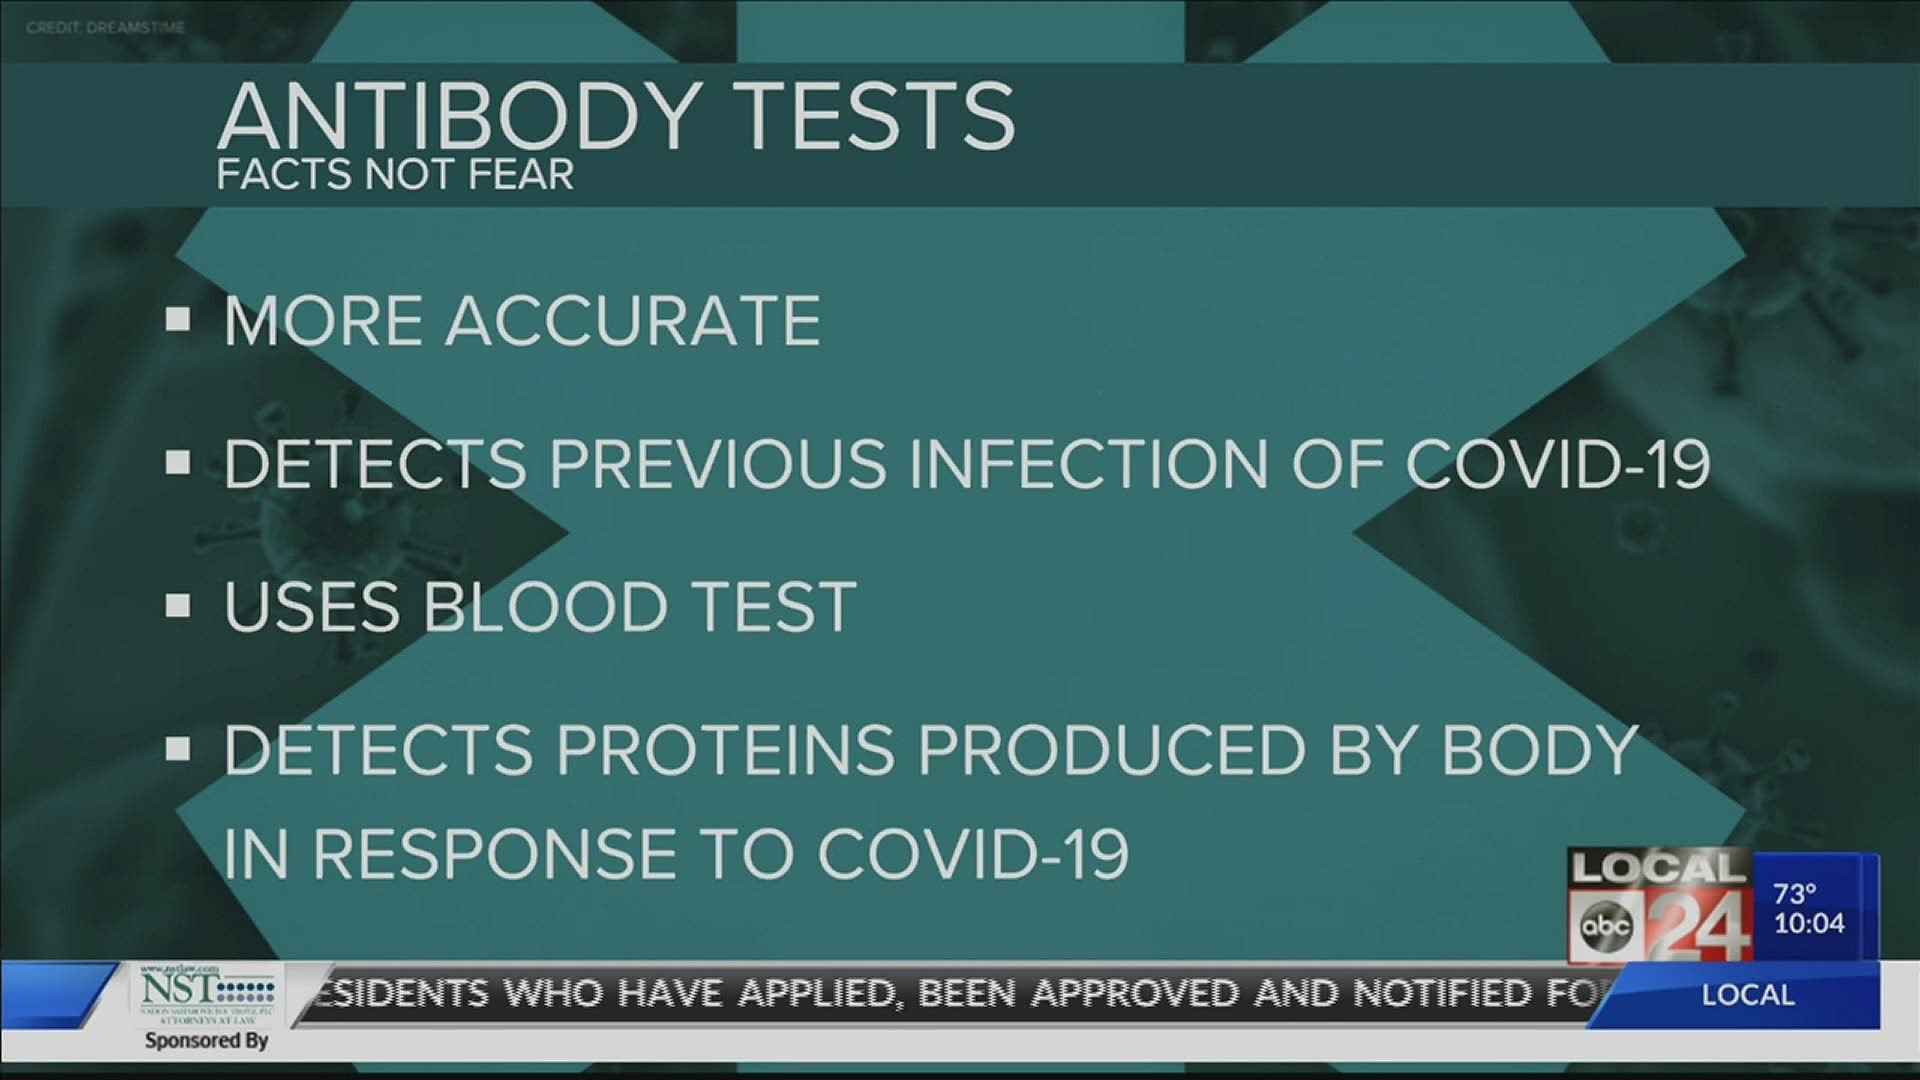 They are both used in connection to COVID-19, but they are two completely different tests used for different reasons